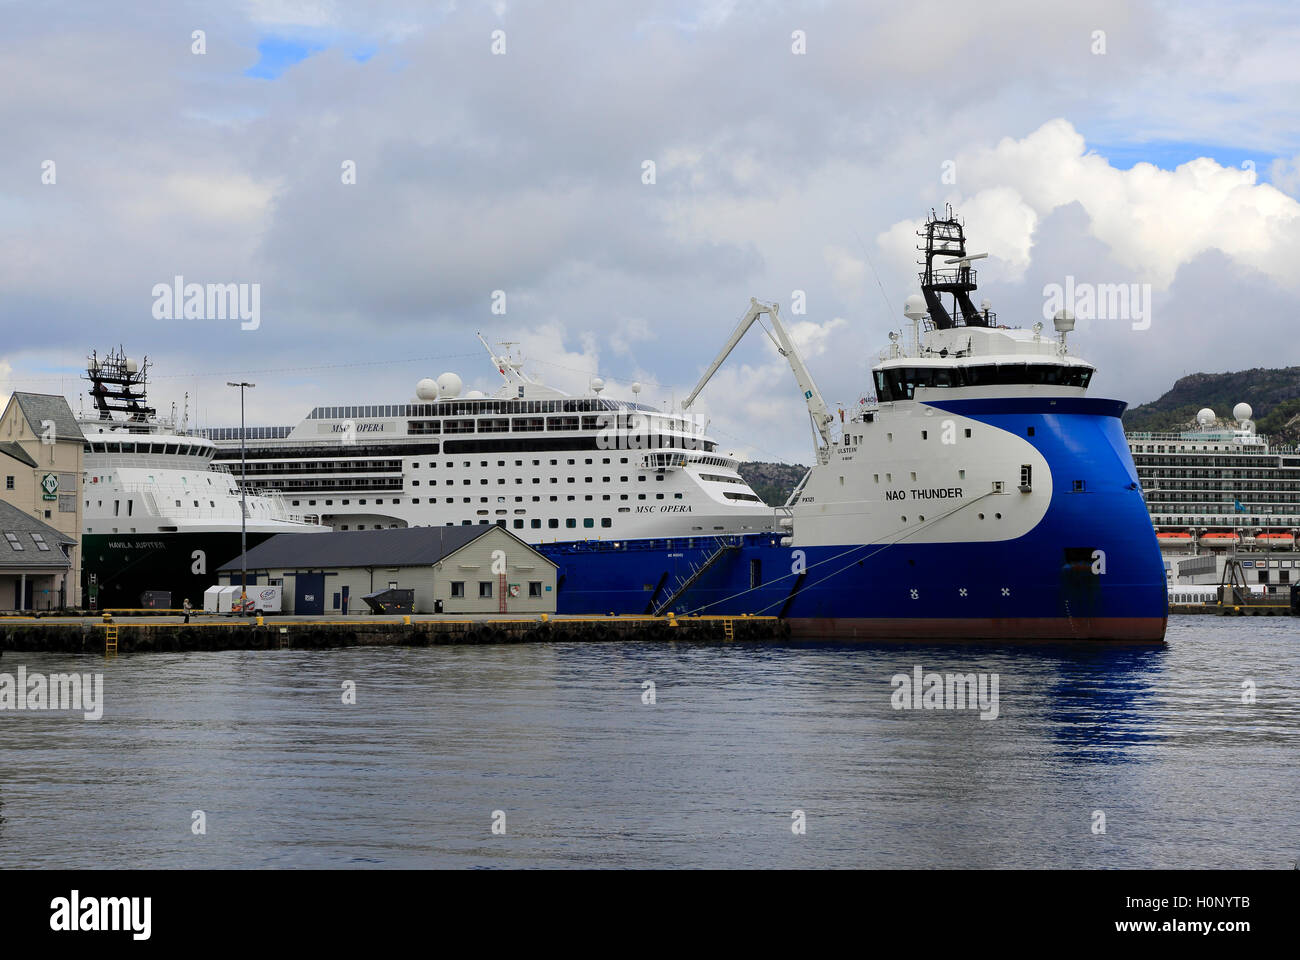 Nao Thunder supply vessel and MSC Opera cruise ship in the harbour, city of Bergen, Norway Stock Photo